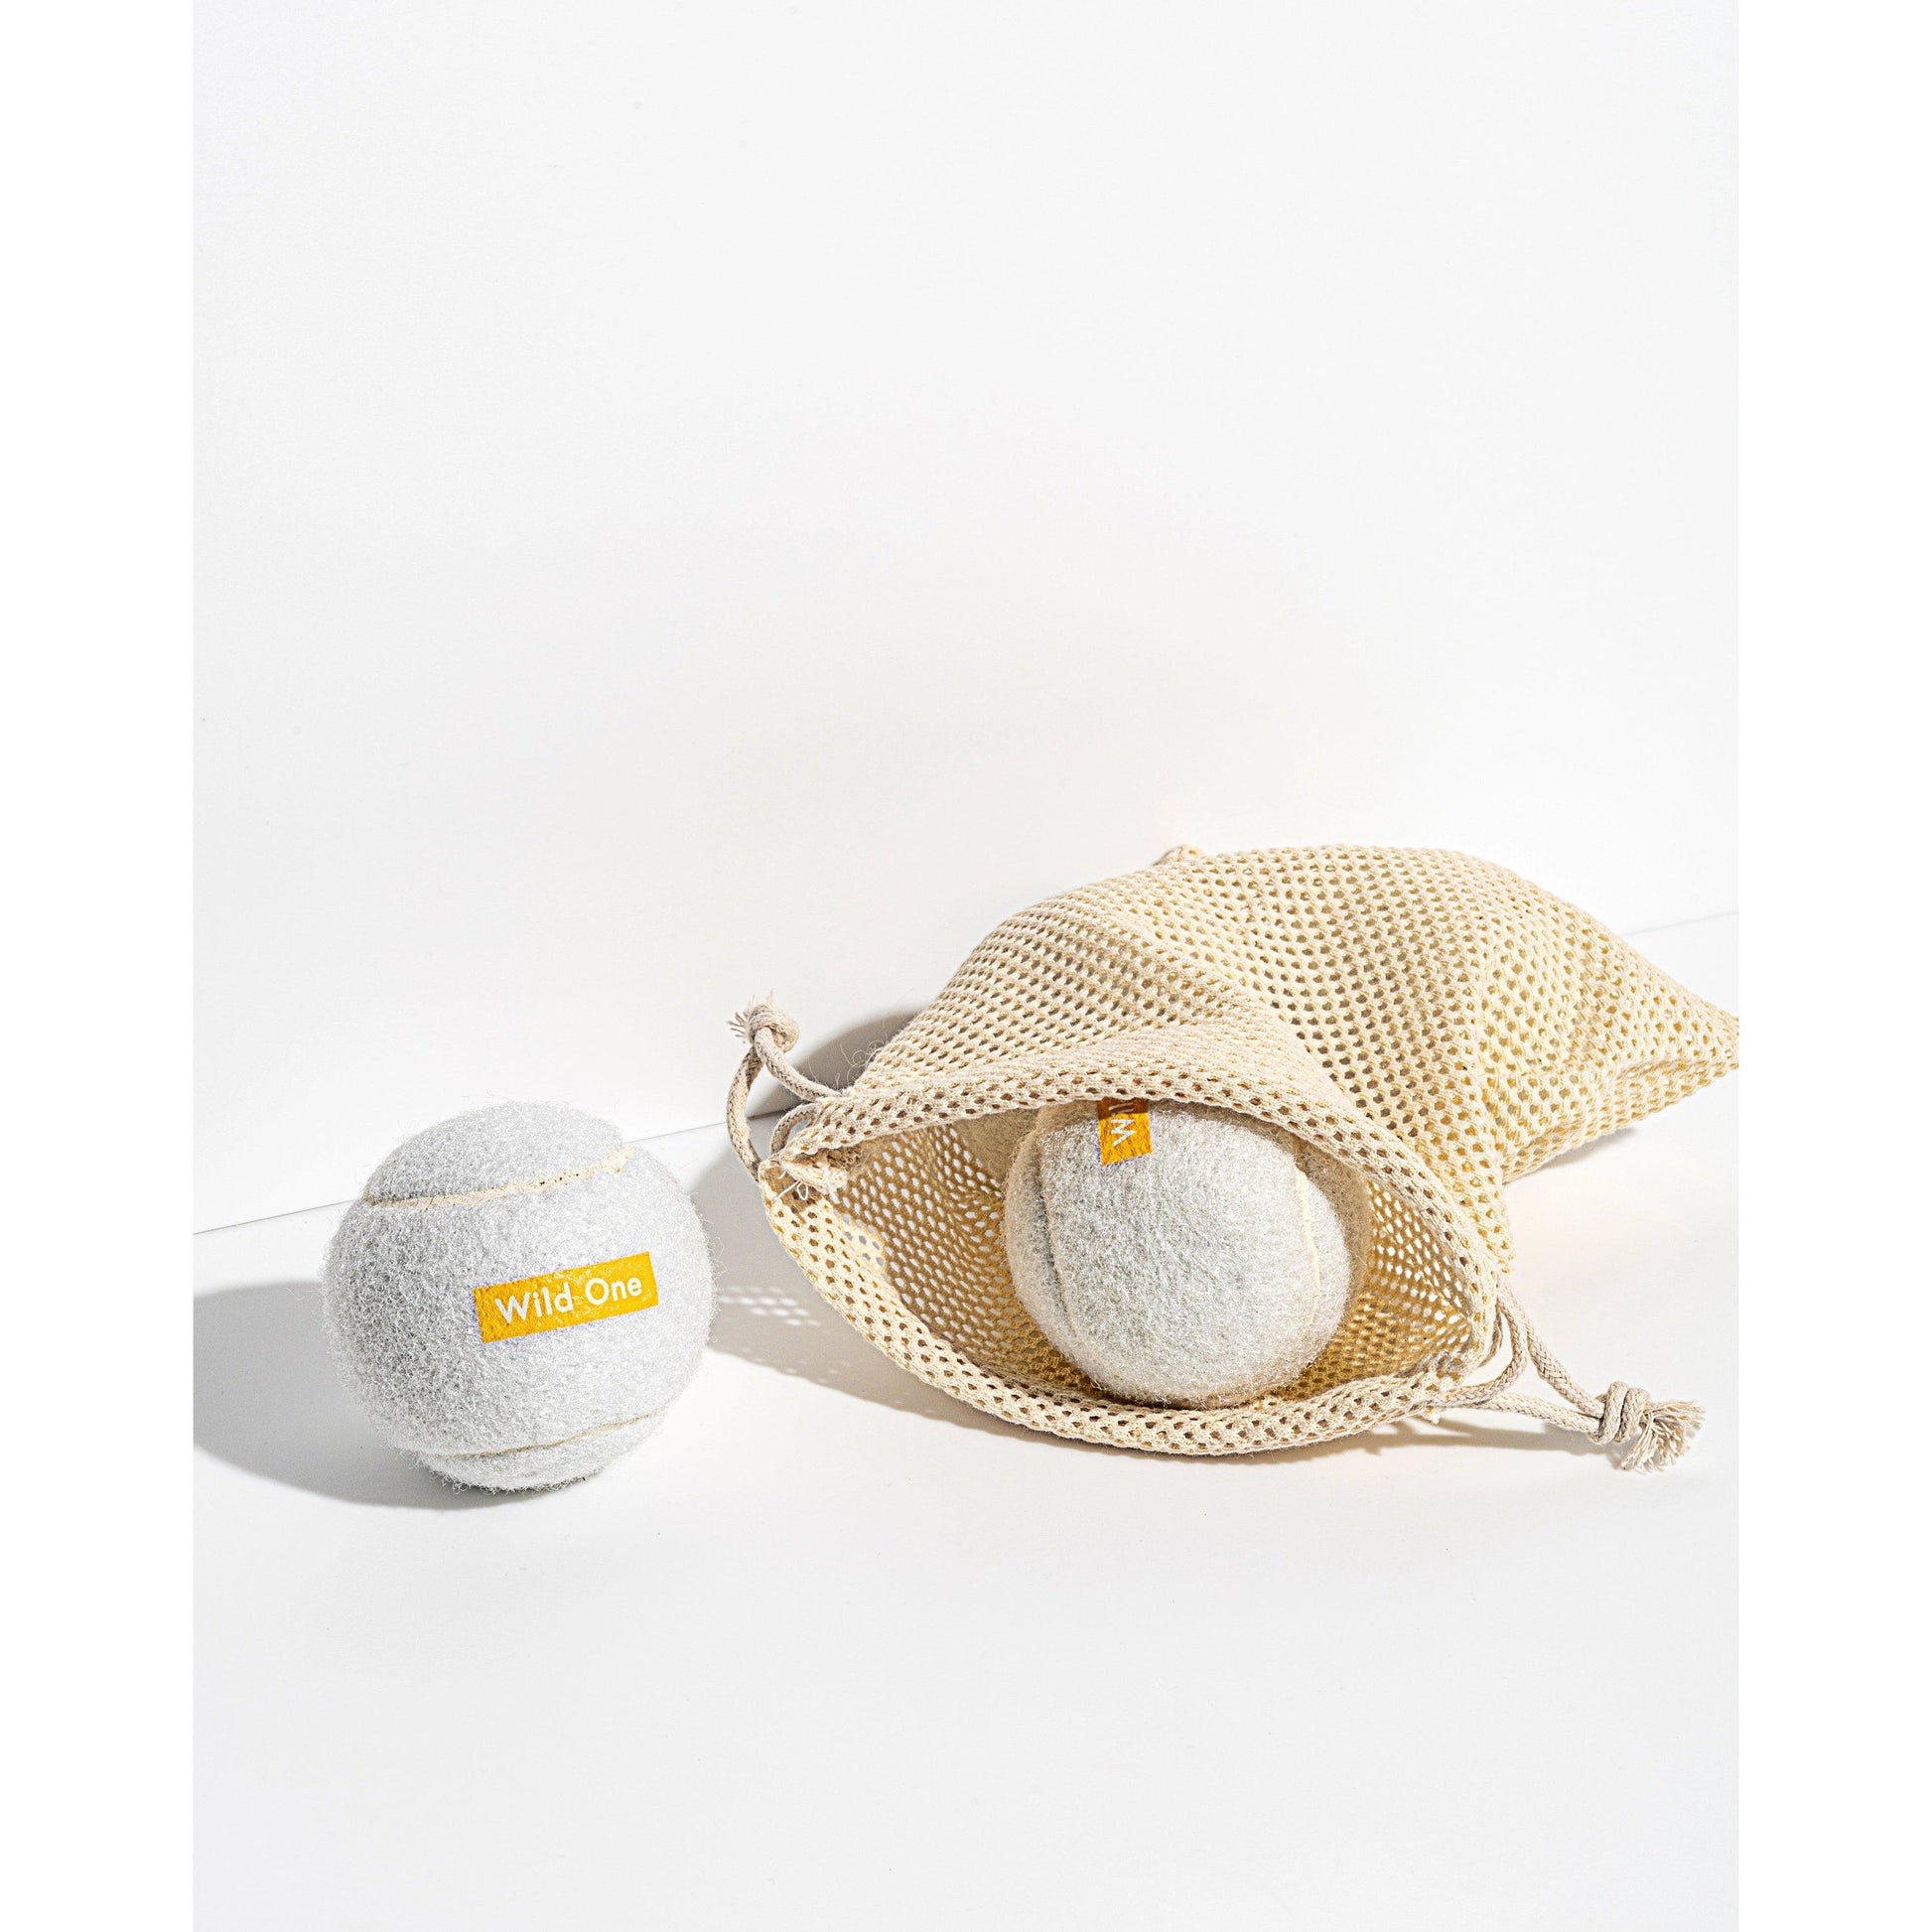 Set of 4 Tennis Balls in White by Wild One - Haven